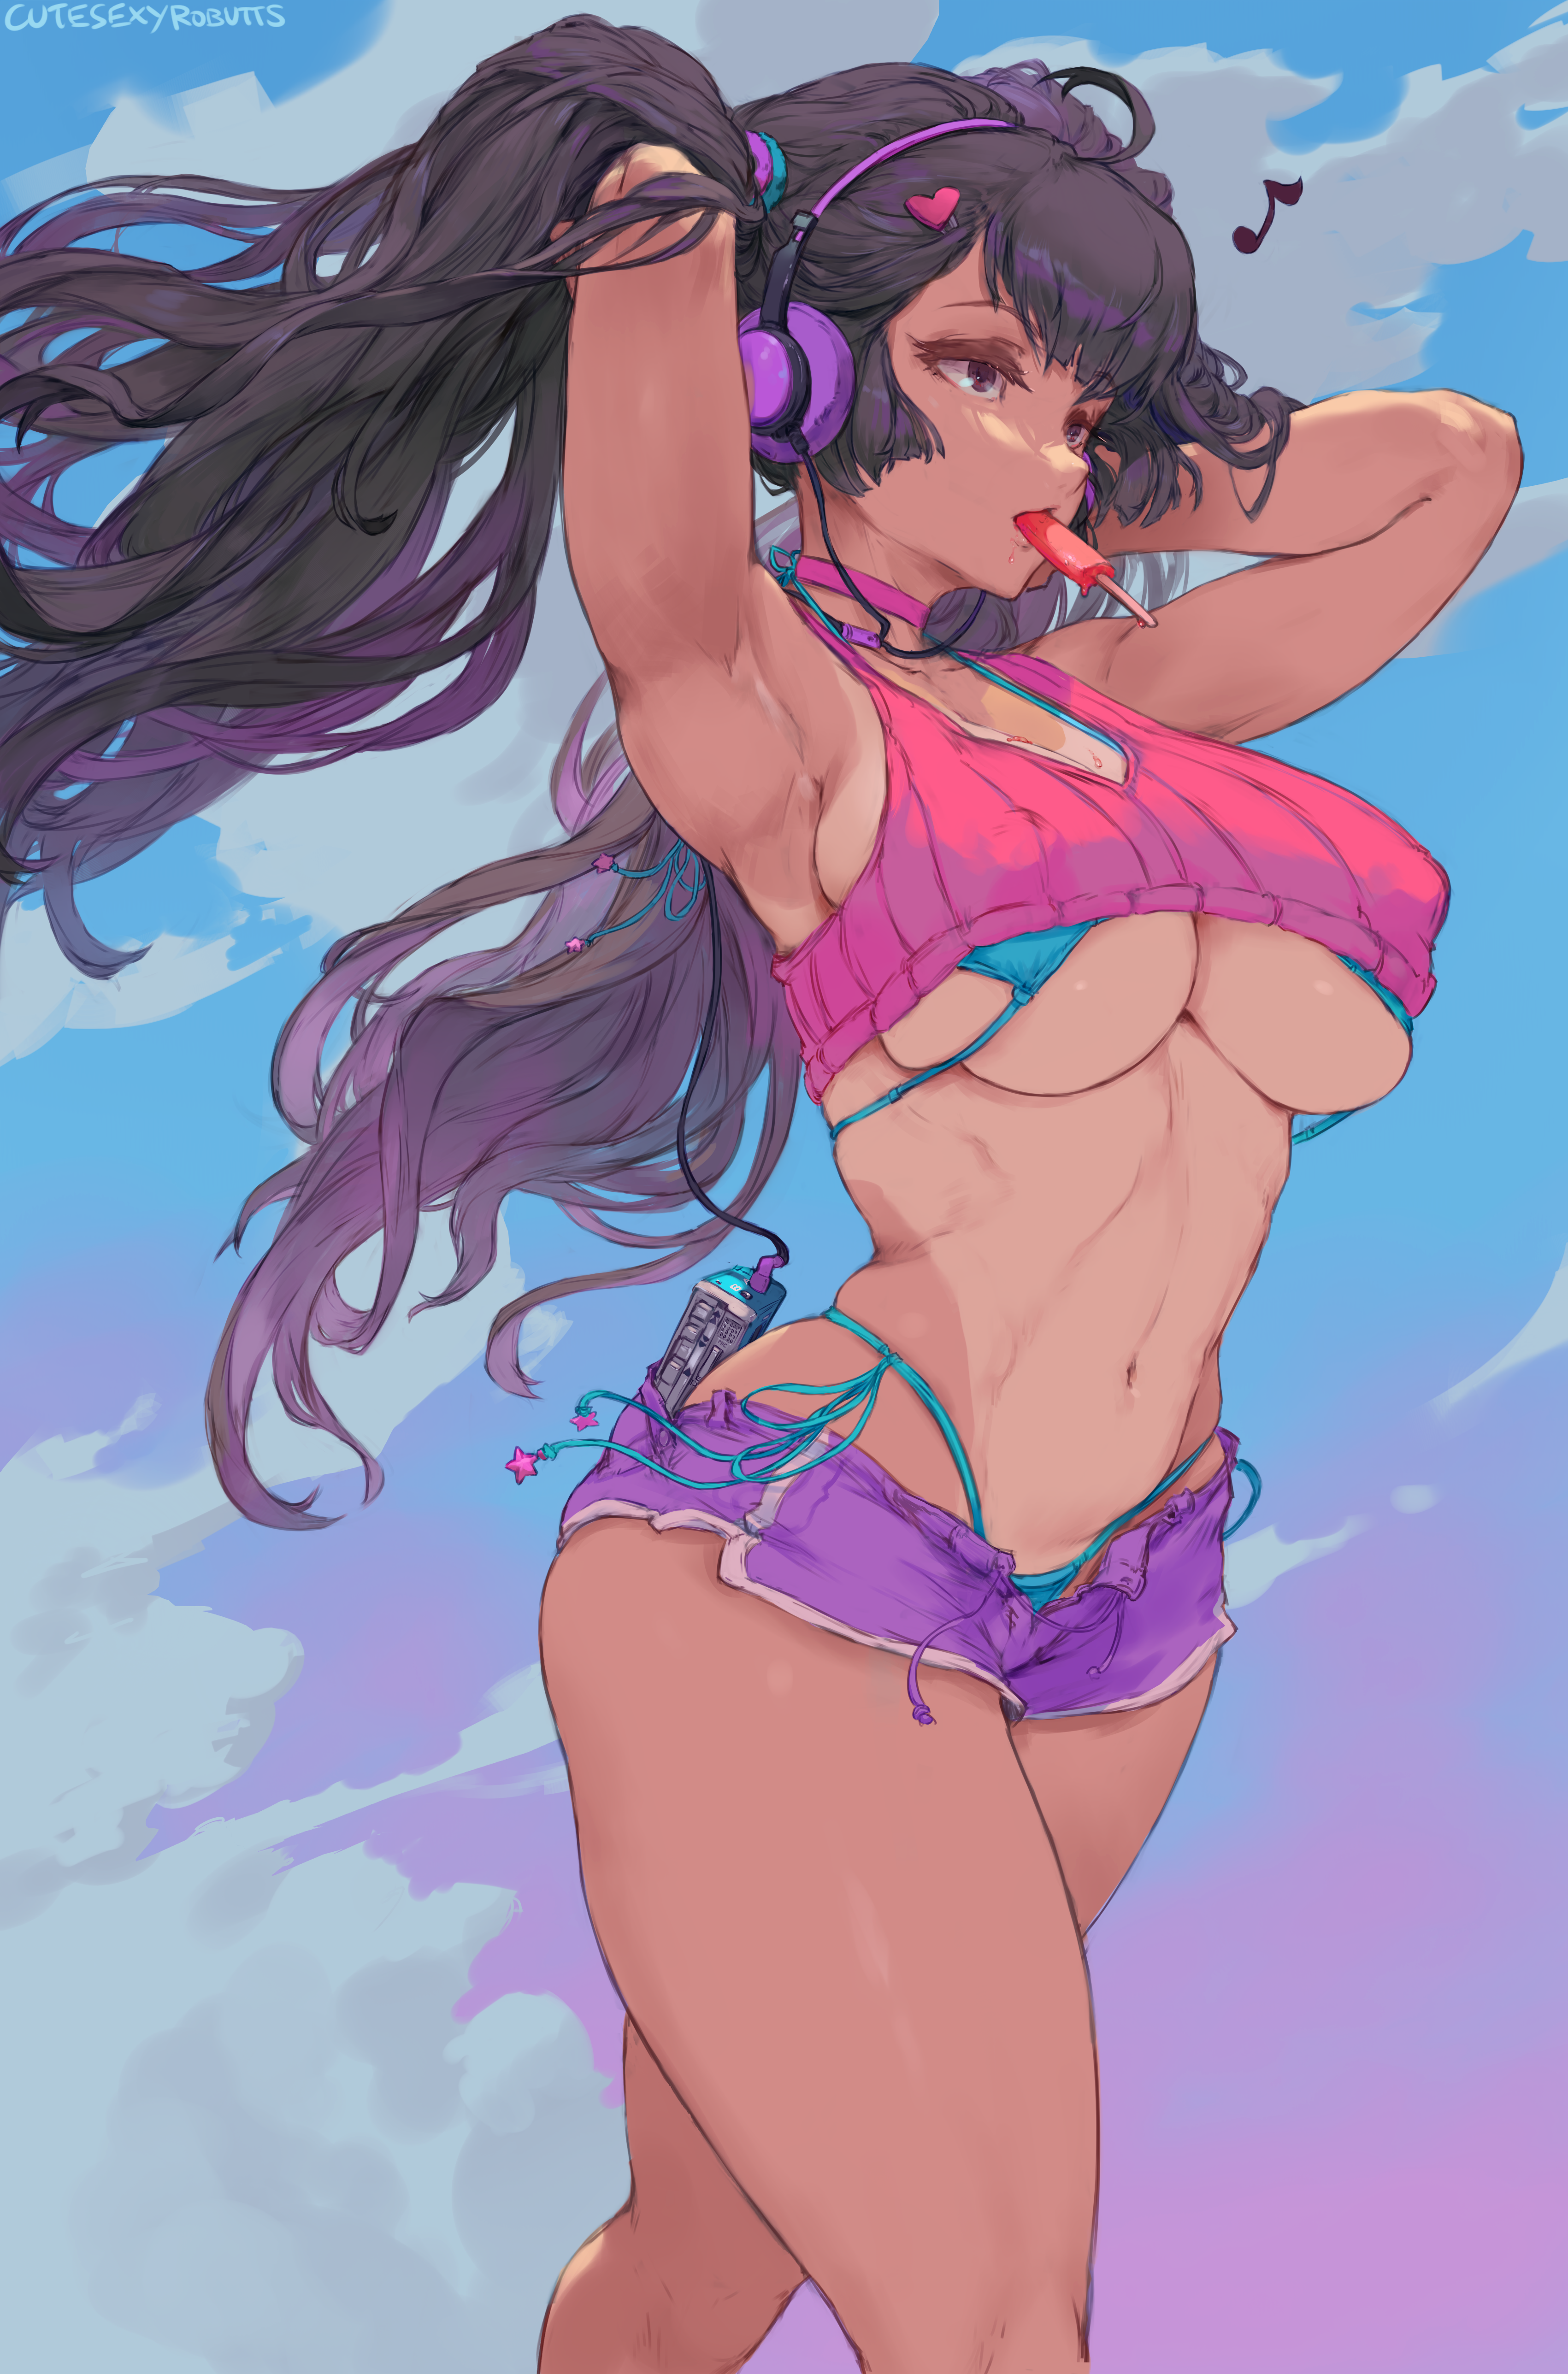 Anime 3402x5151 anime girls original characters anime long hair twintails headphones Walkman profile popsicle ice cream choker 1990s pink tops short tops bikini swimwear huge breasts underboob belly short shorts armpits thick thigh hand(s) on head clouds portrait display walking 2D artwork drawing digital art Cutesexyrobutts tanned tan lines hairpins gradient hair standing arms up arm(s) behind head string panties string bikini